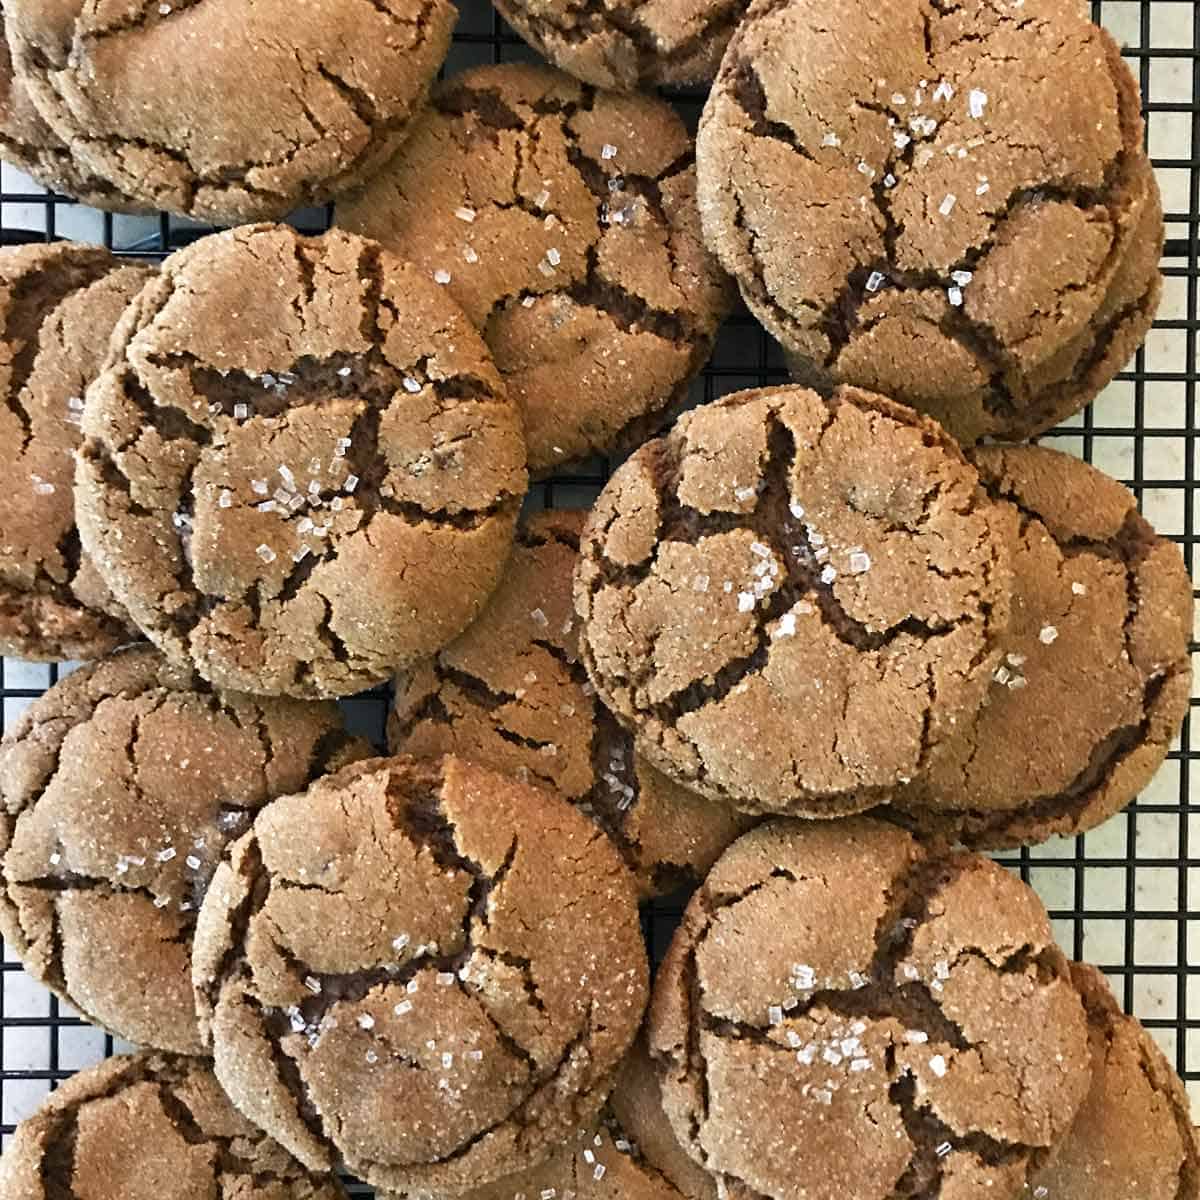 Baked molasses cookies with crinkled tops on a cooling rack.